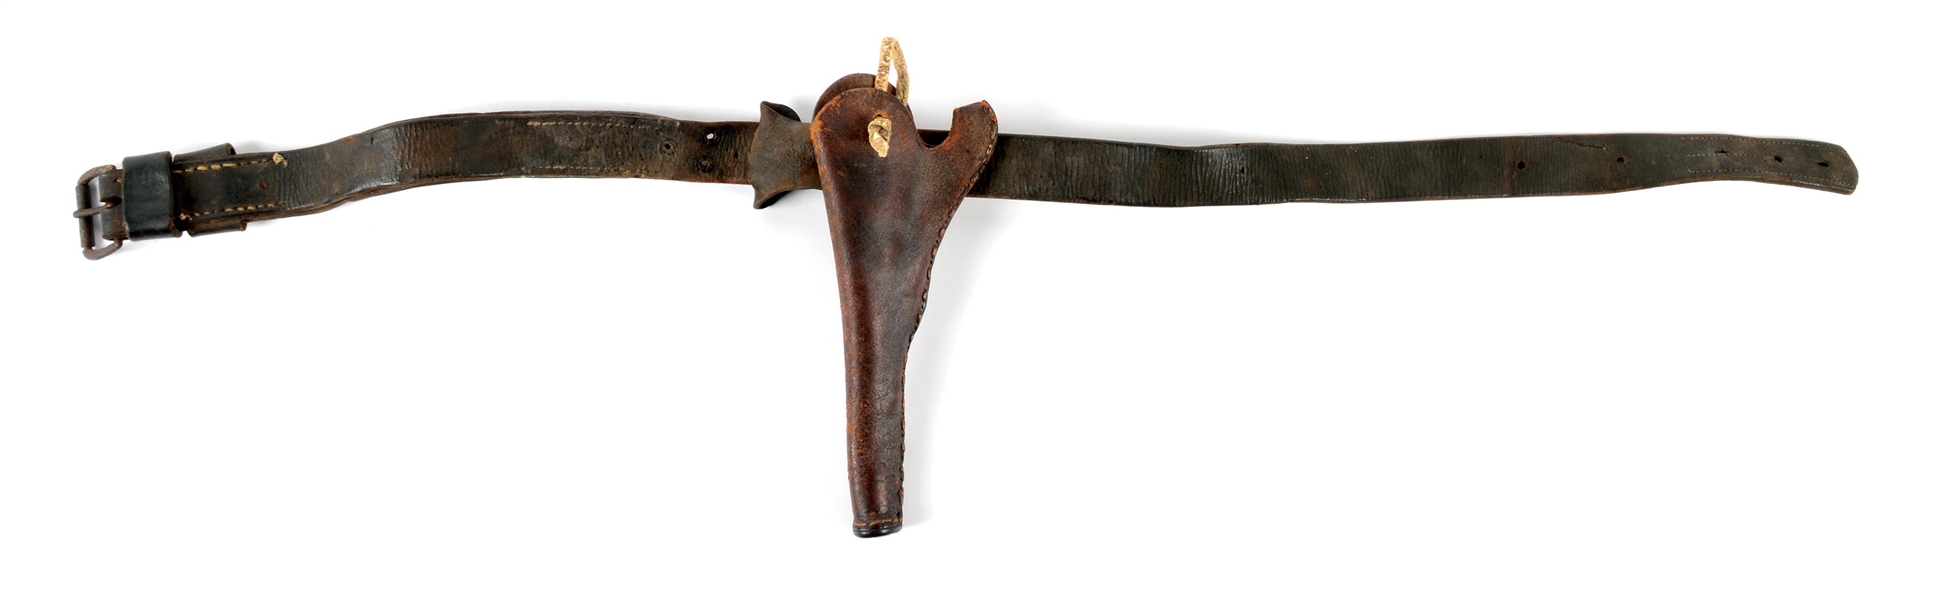 EARLY "SLIM JIM" STYLE HOLSTER AND BELT. 